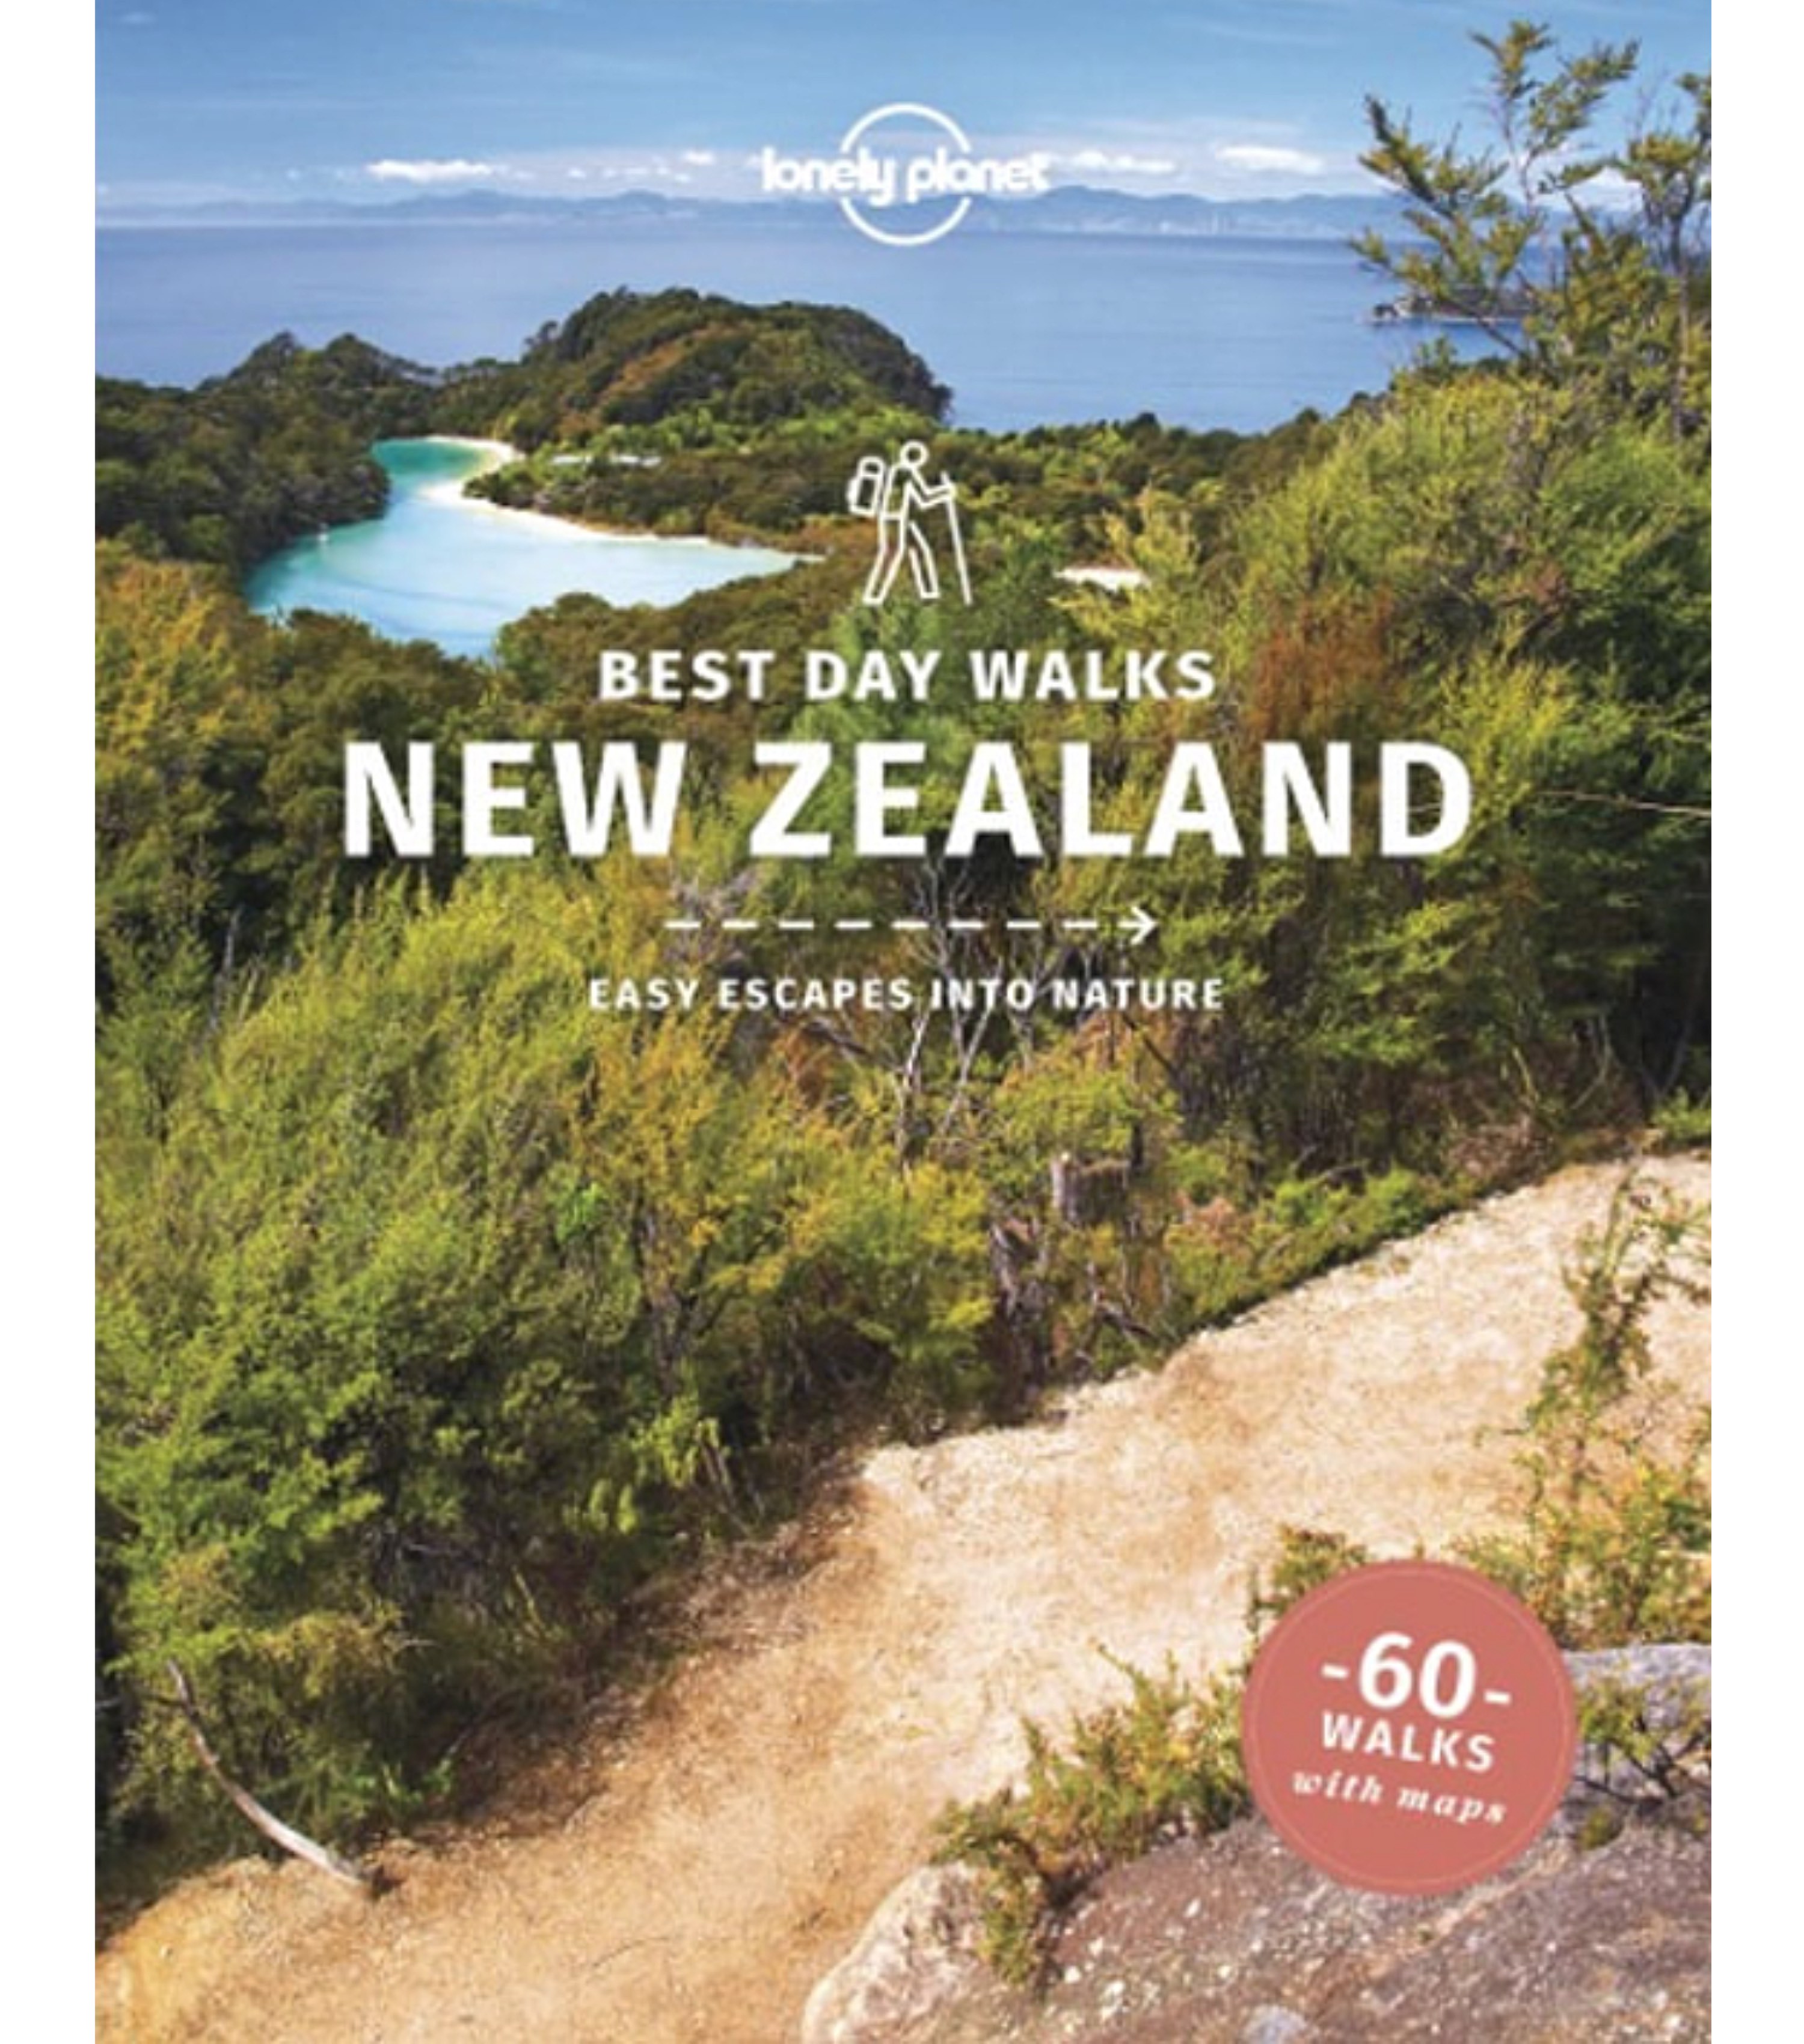 Walks　Best　Zealand　Planet　Edition　Planet　Lonely　(9781838691219)　Lonely　New　Day　by